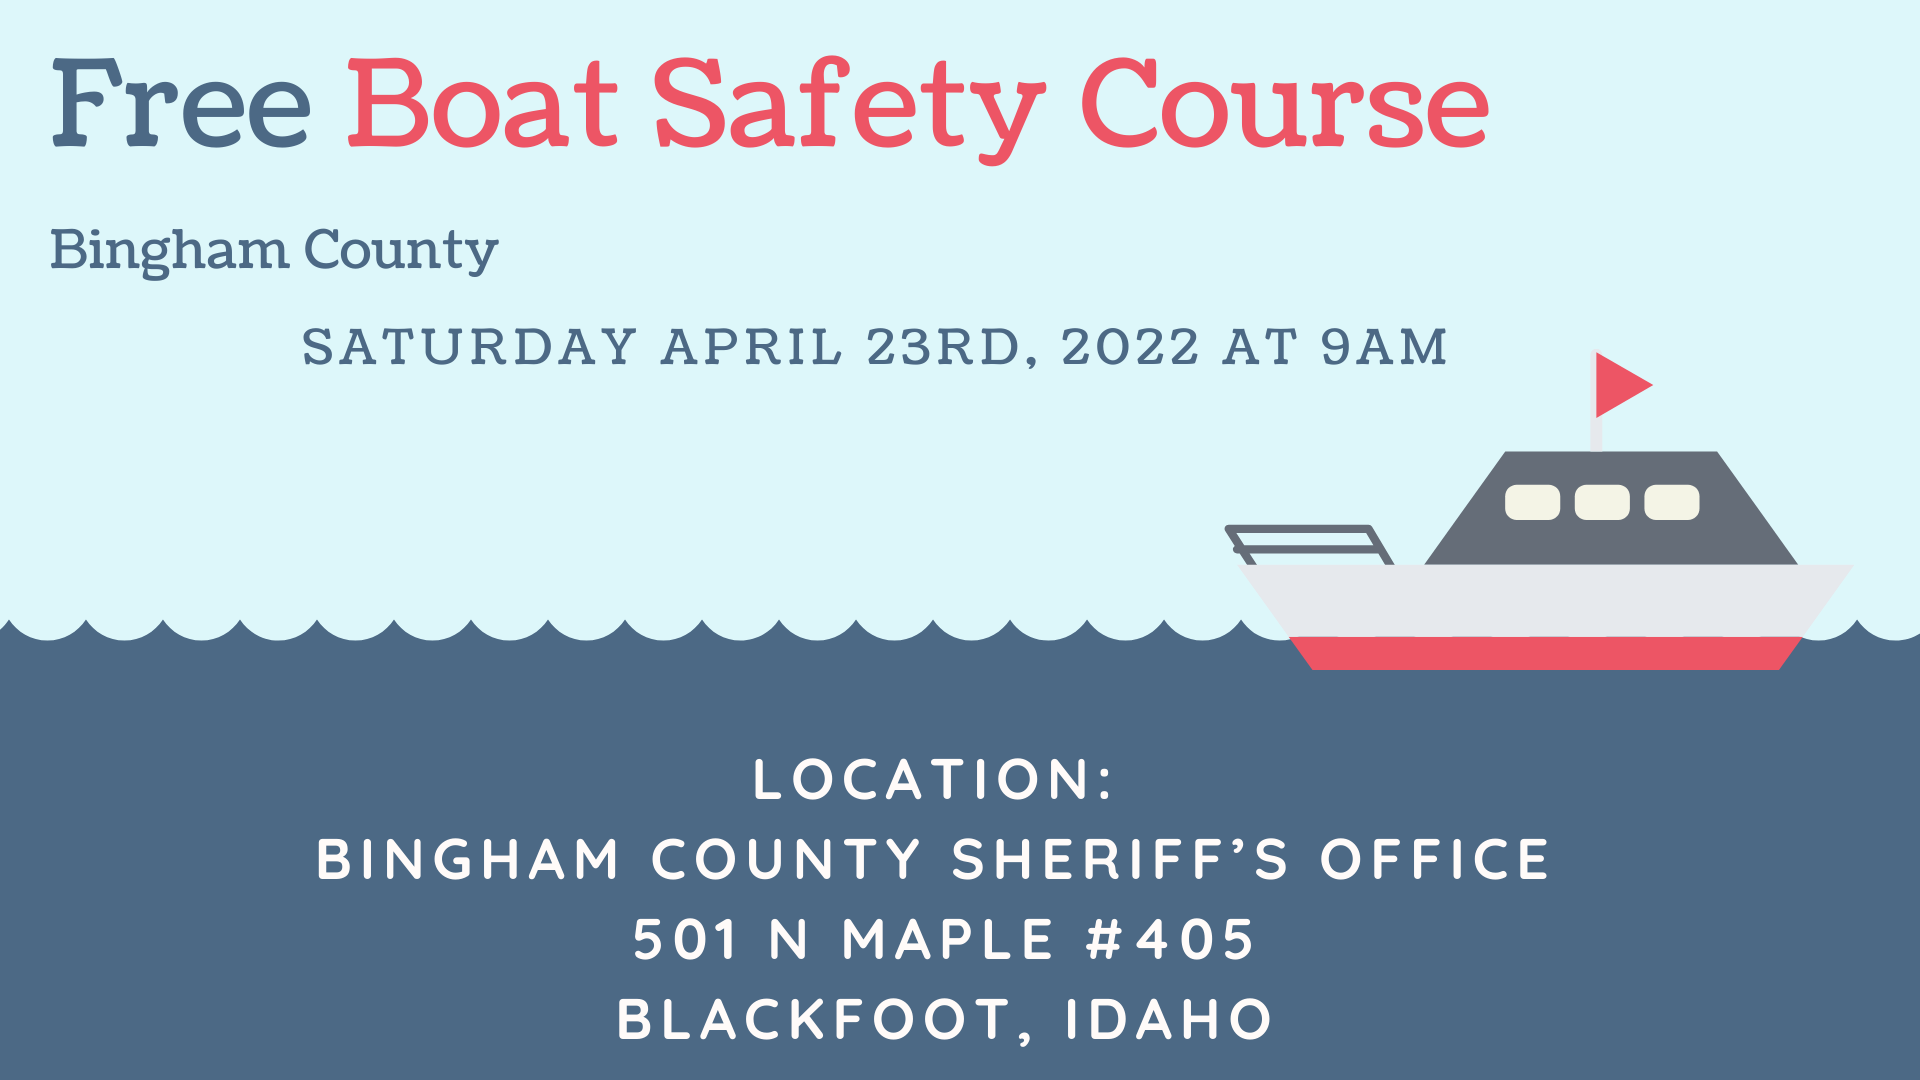 Bingham County Sheriff's Office will be holding a FREE Boat Idaho Course Saturday April 23rd, 2022 at 9am. This will be held at the Bingham County Sheriff's Office. To sign up, email Drew Lusk at luskdrew@snakeriver.org